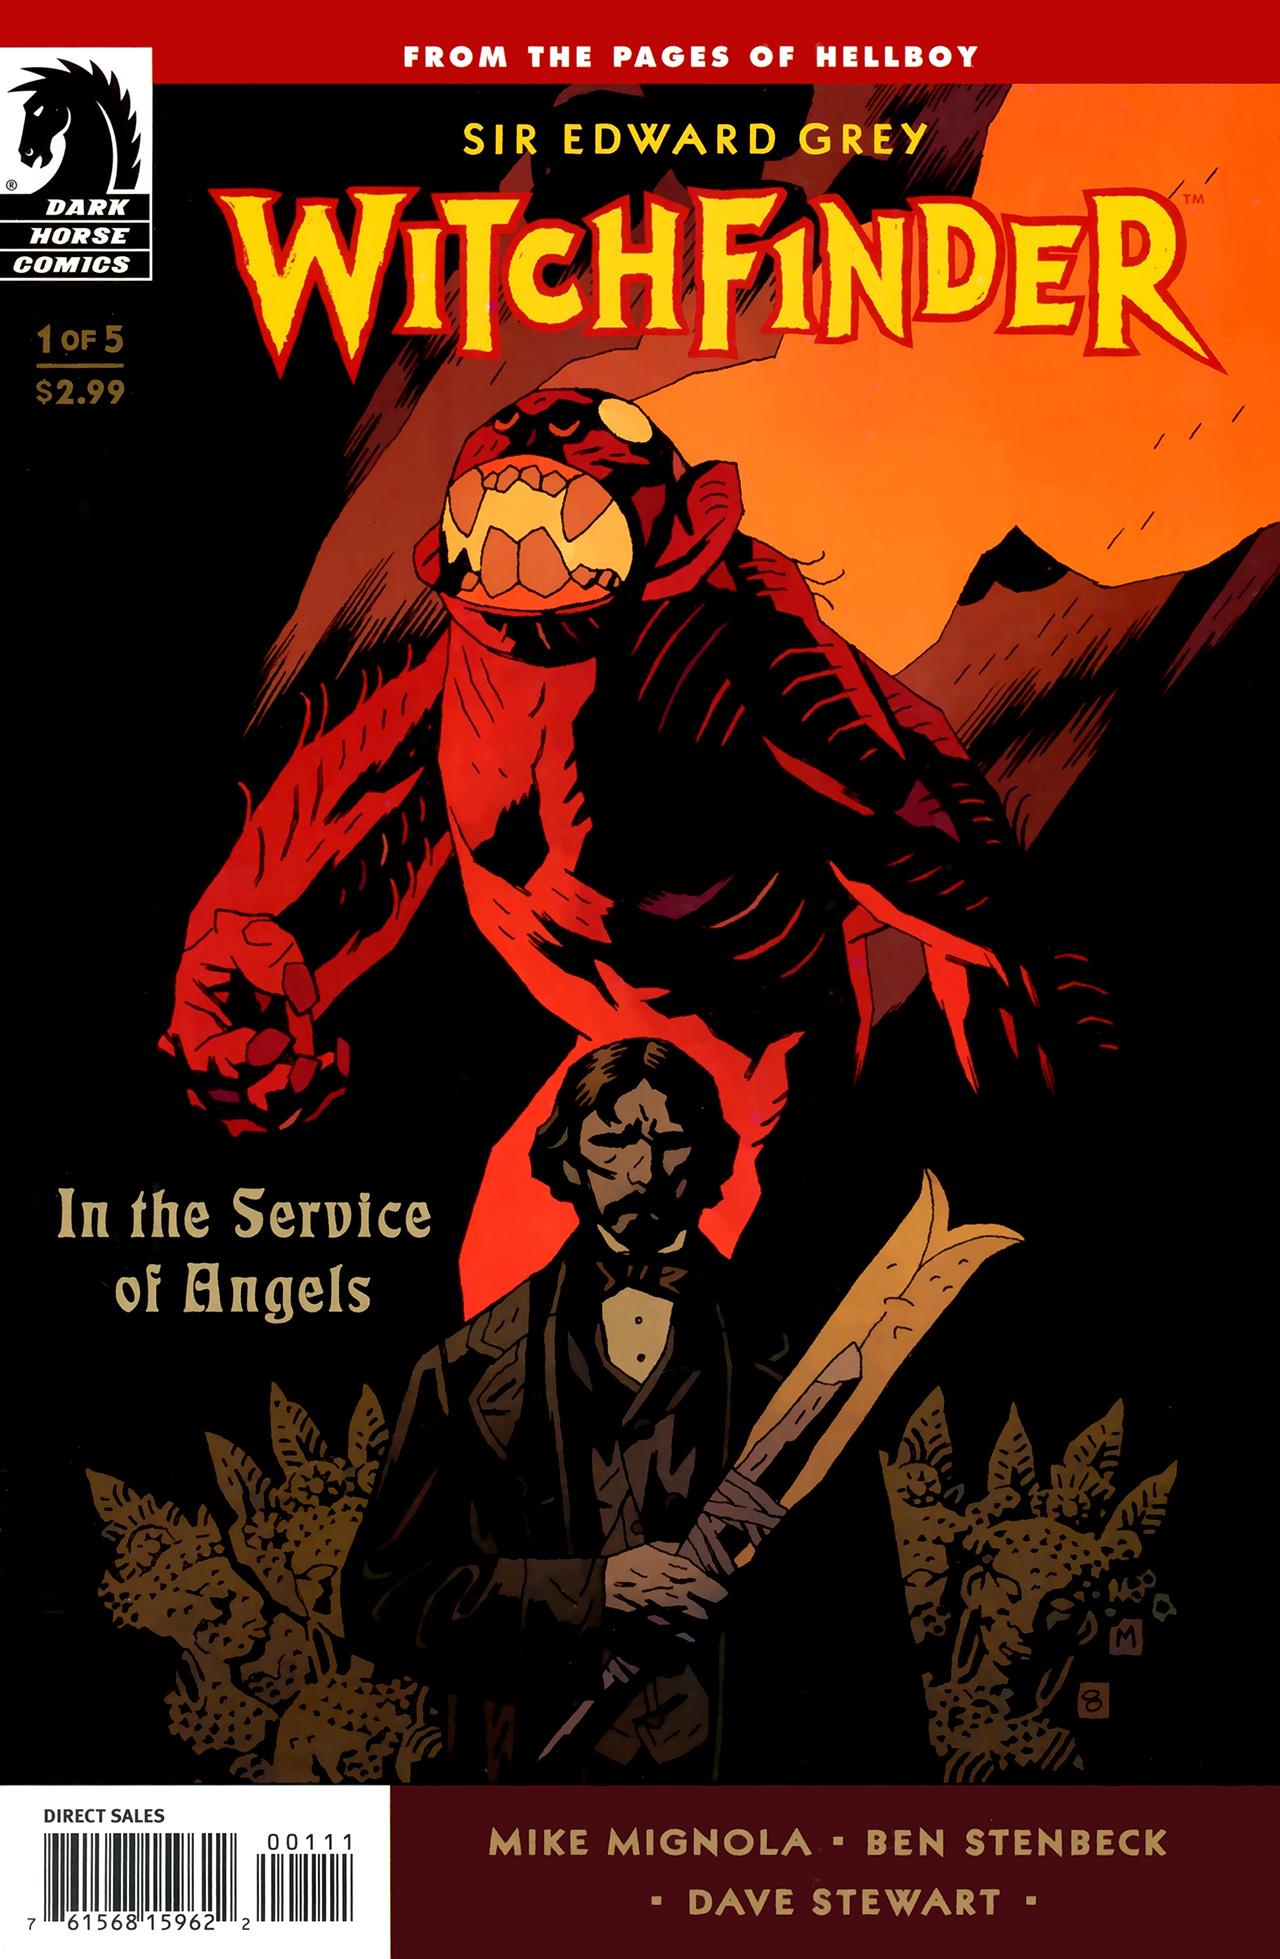 Sir Edward Grey Witchfinder: In the Service of Angels Vol. 1 #1